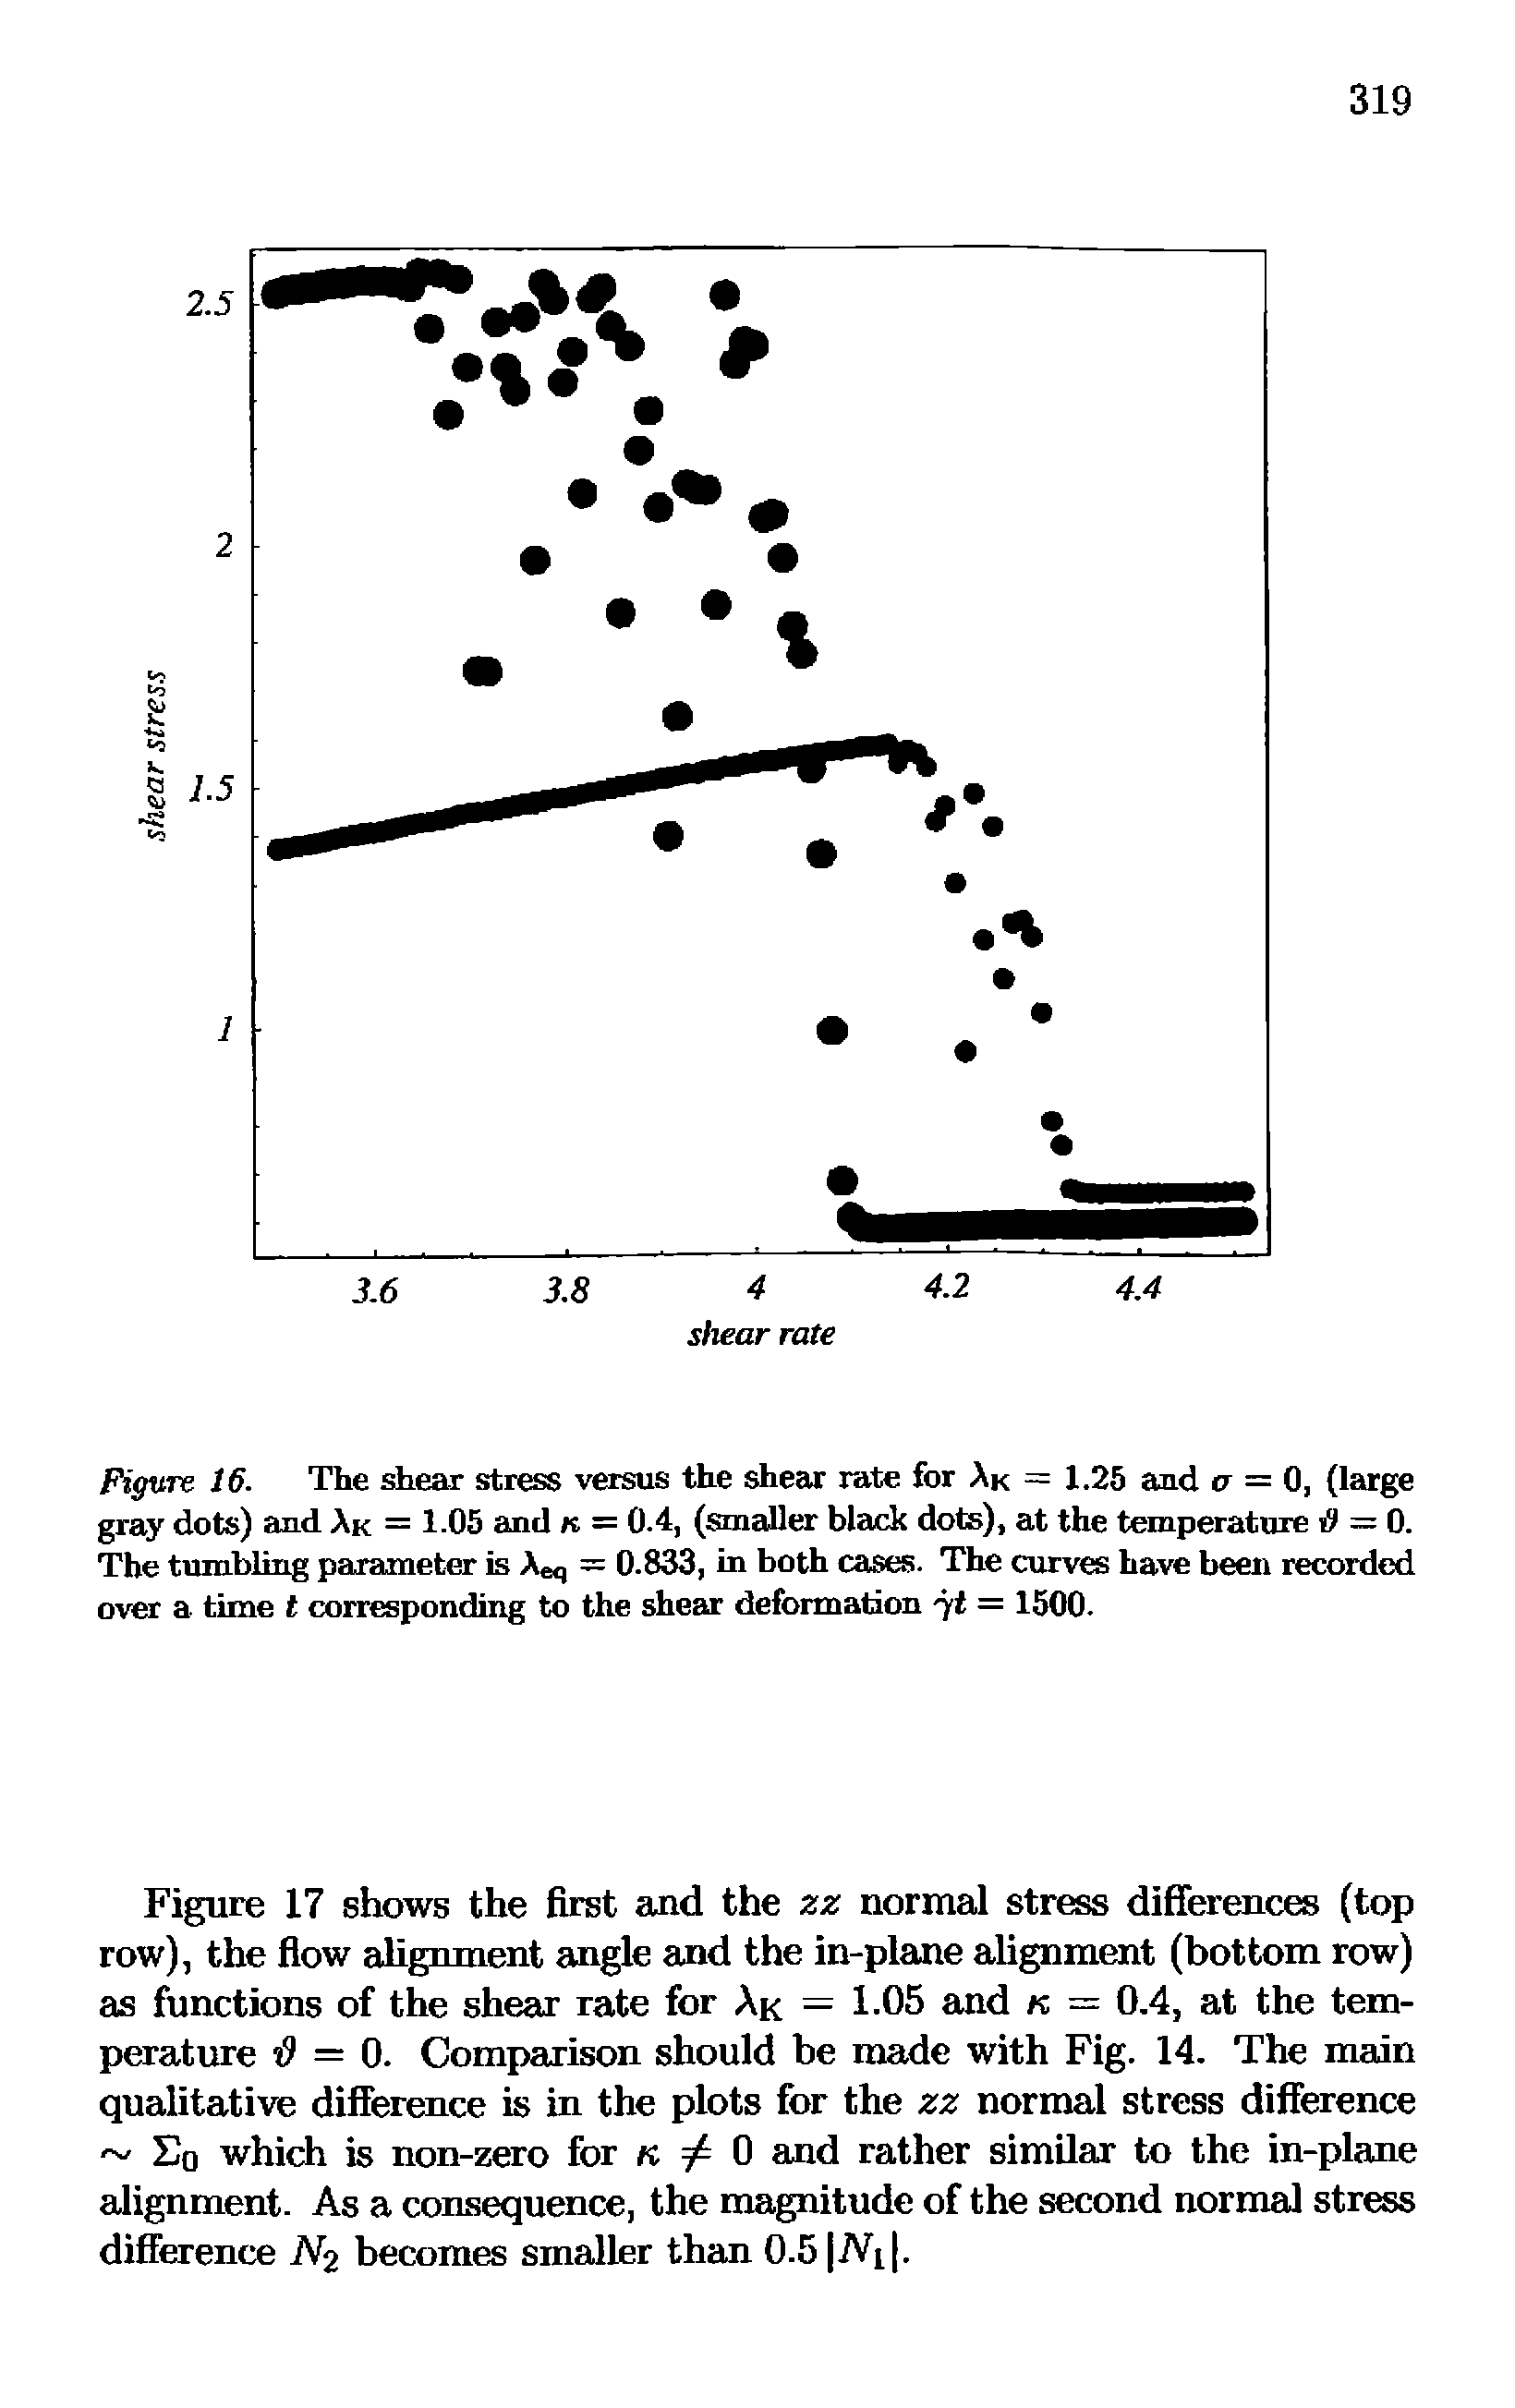 Figure 16. The shear stress versus the shear rate for Ak = 1.25 aad <r = 0, (large gray dots) and Ak = 1-05 and k — 0.4, (smaller black dots), at the temperature = 0. The tumbling parameter is Aeq = 0.833, in both cases. The curves have been recorded over a time t corresponding to the shear deformation 7 = 1500.